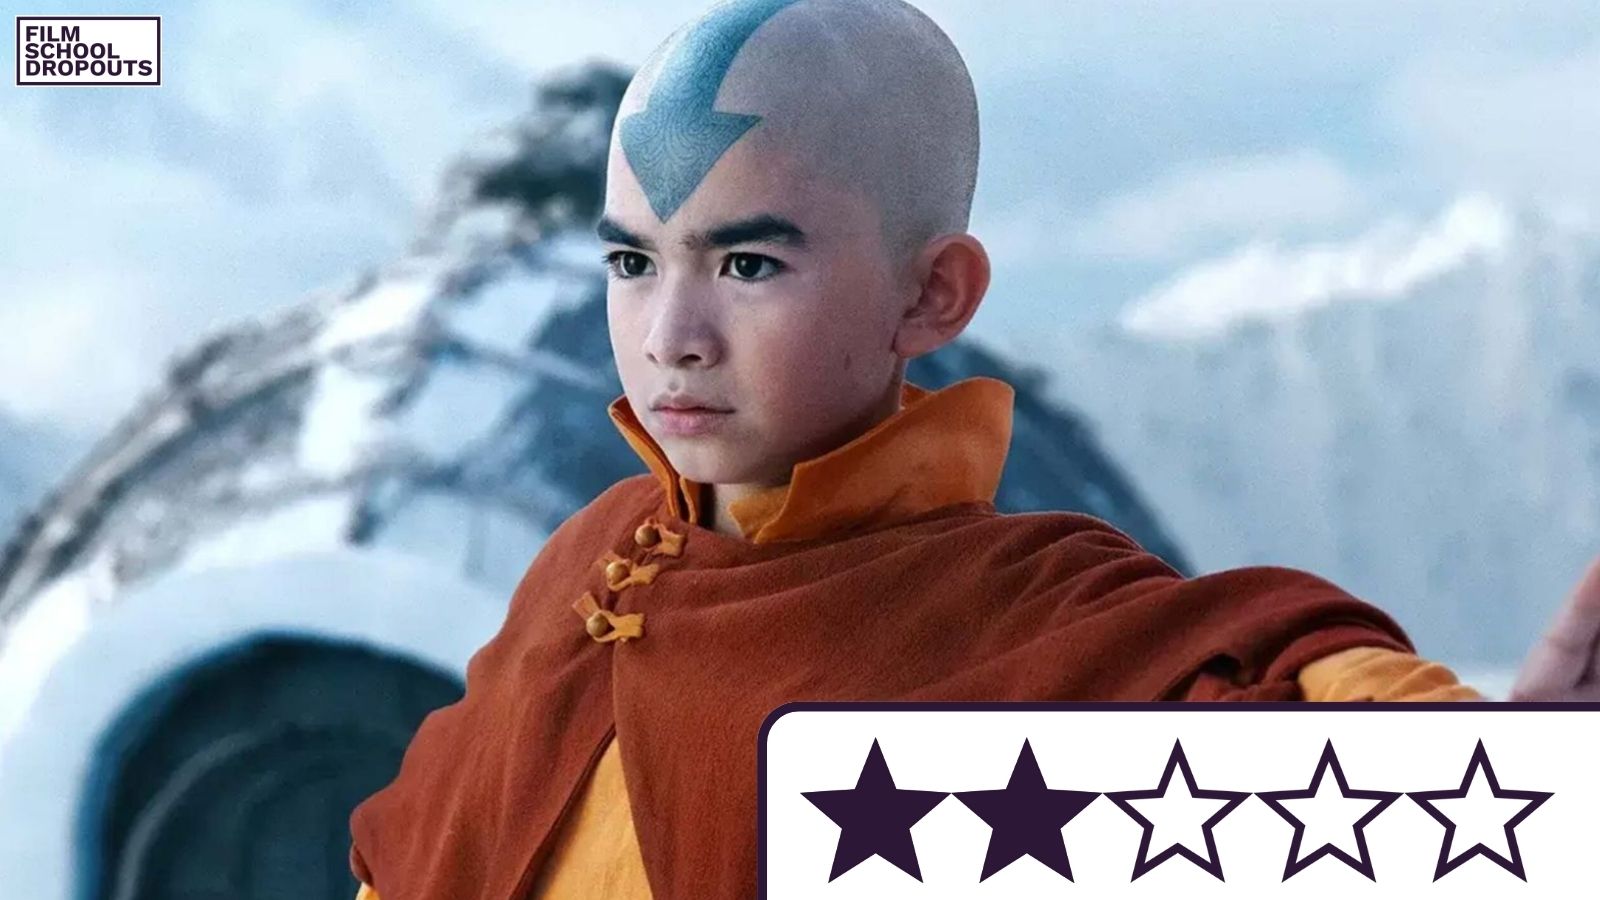 Avatar: The Last Airbender Episode 1 Review